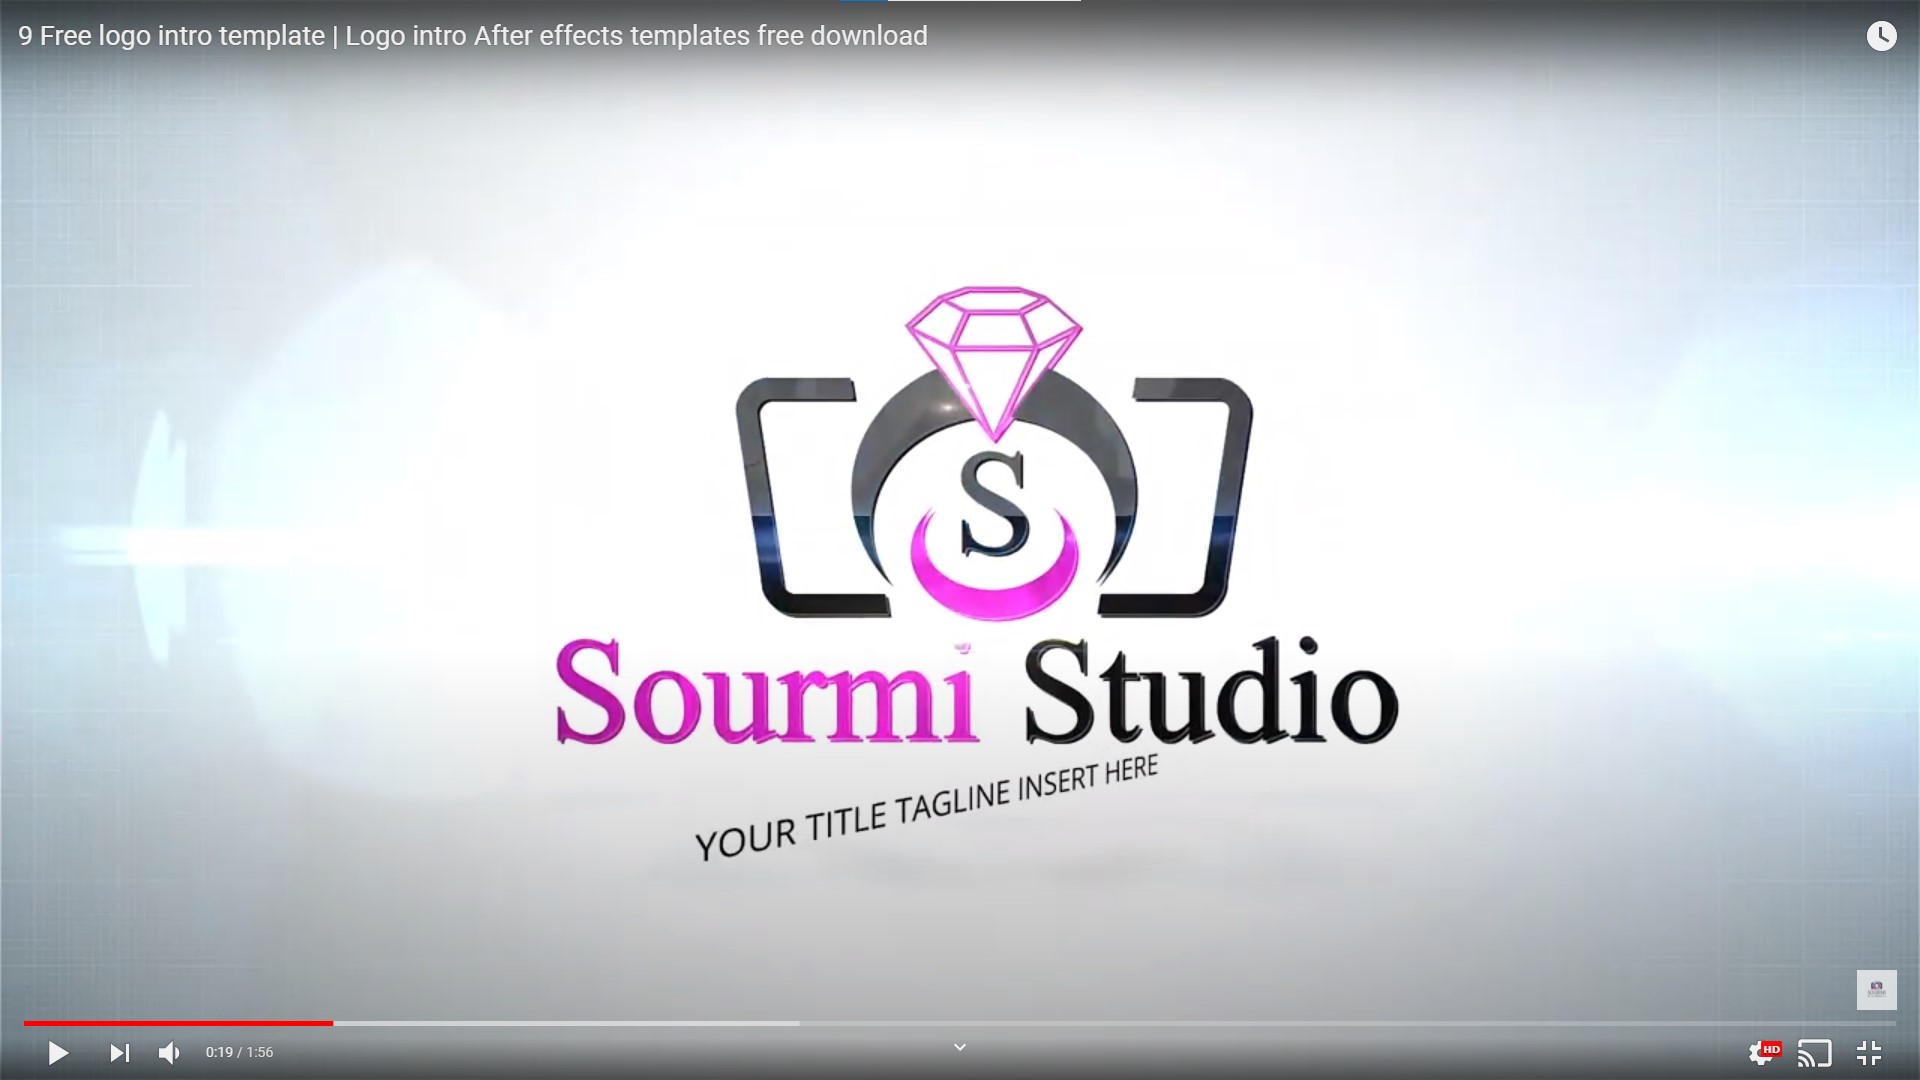 after effects logo intro templates